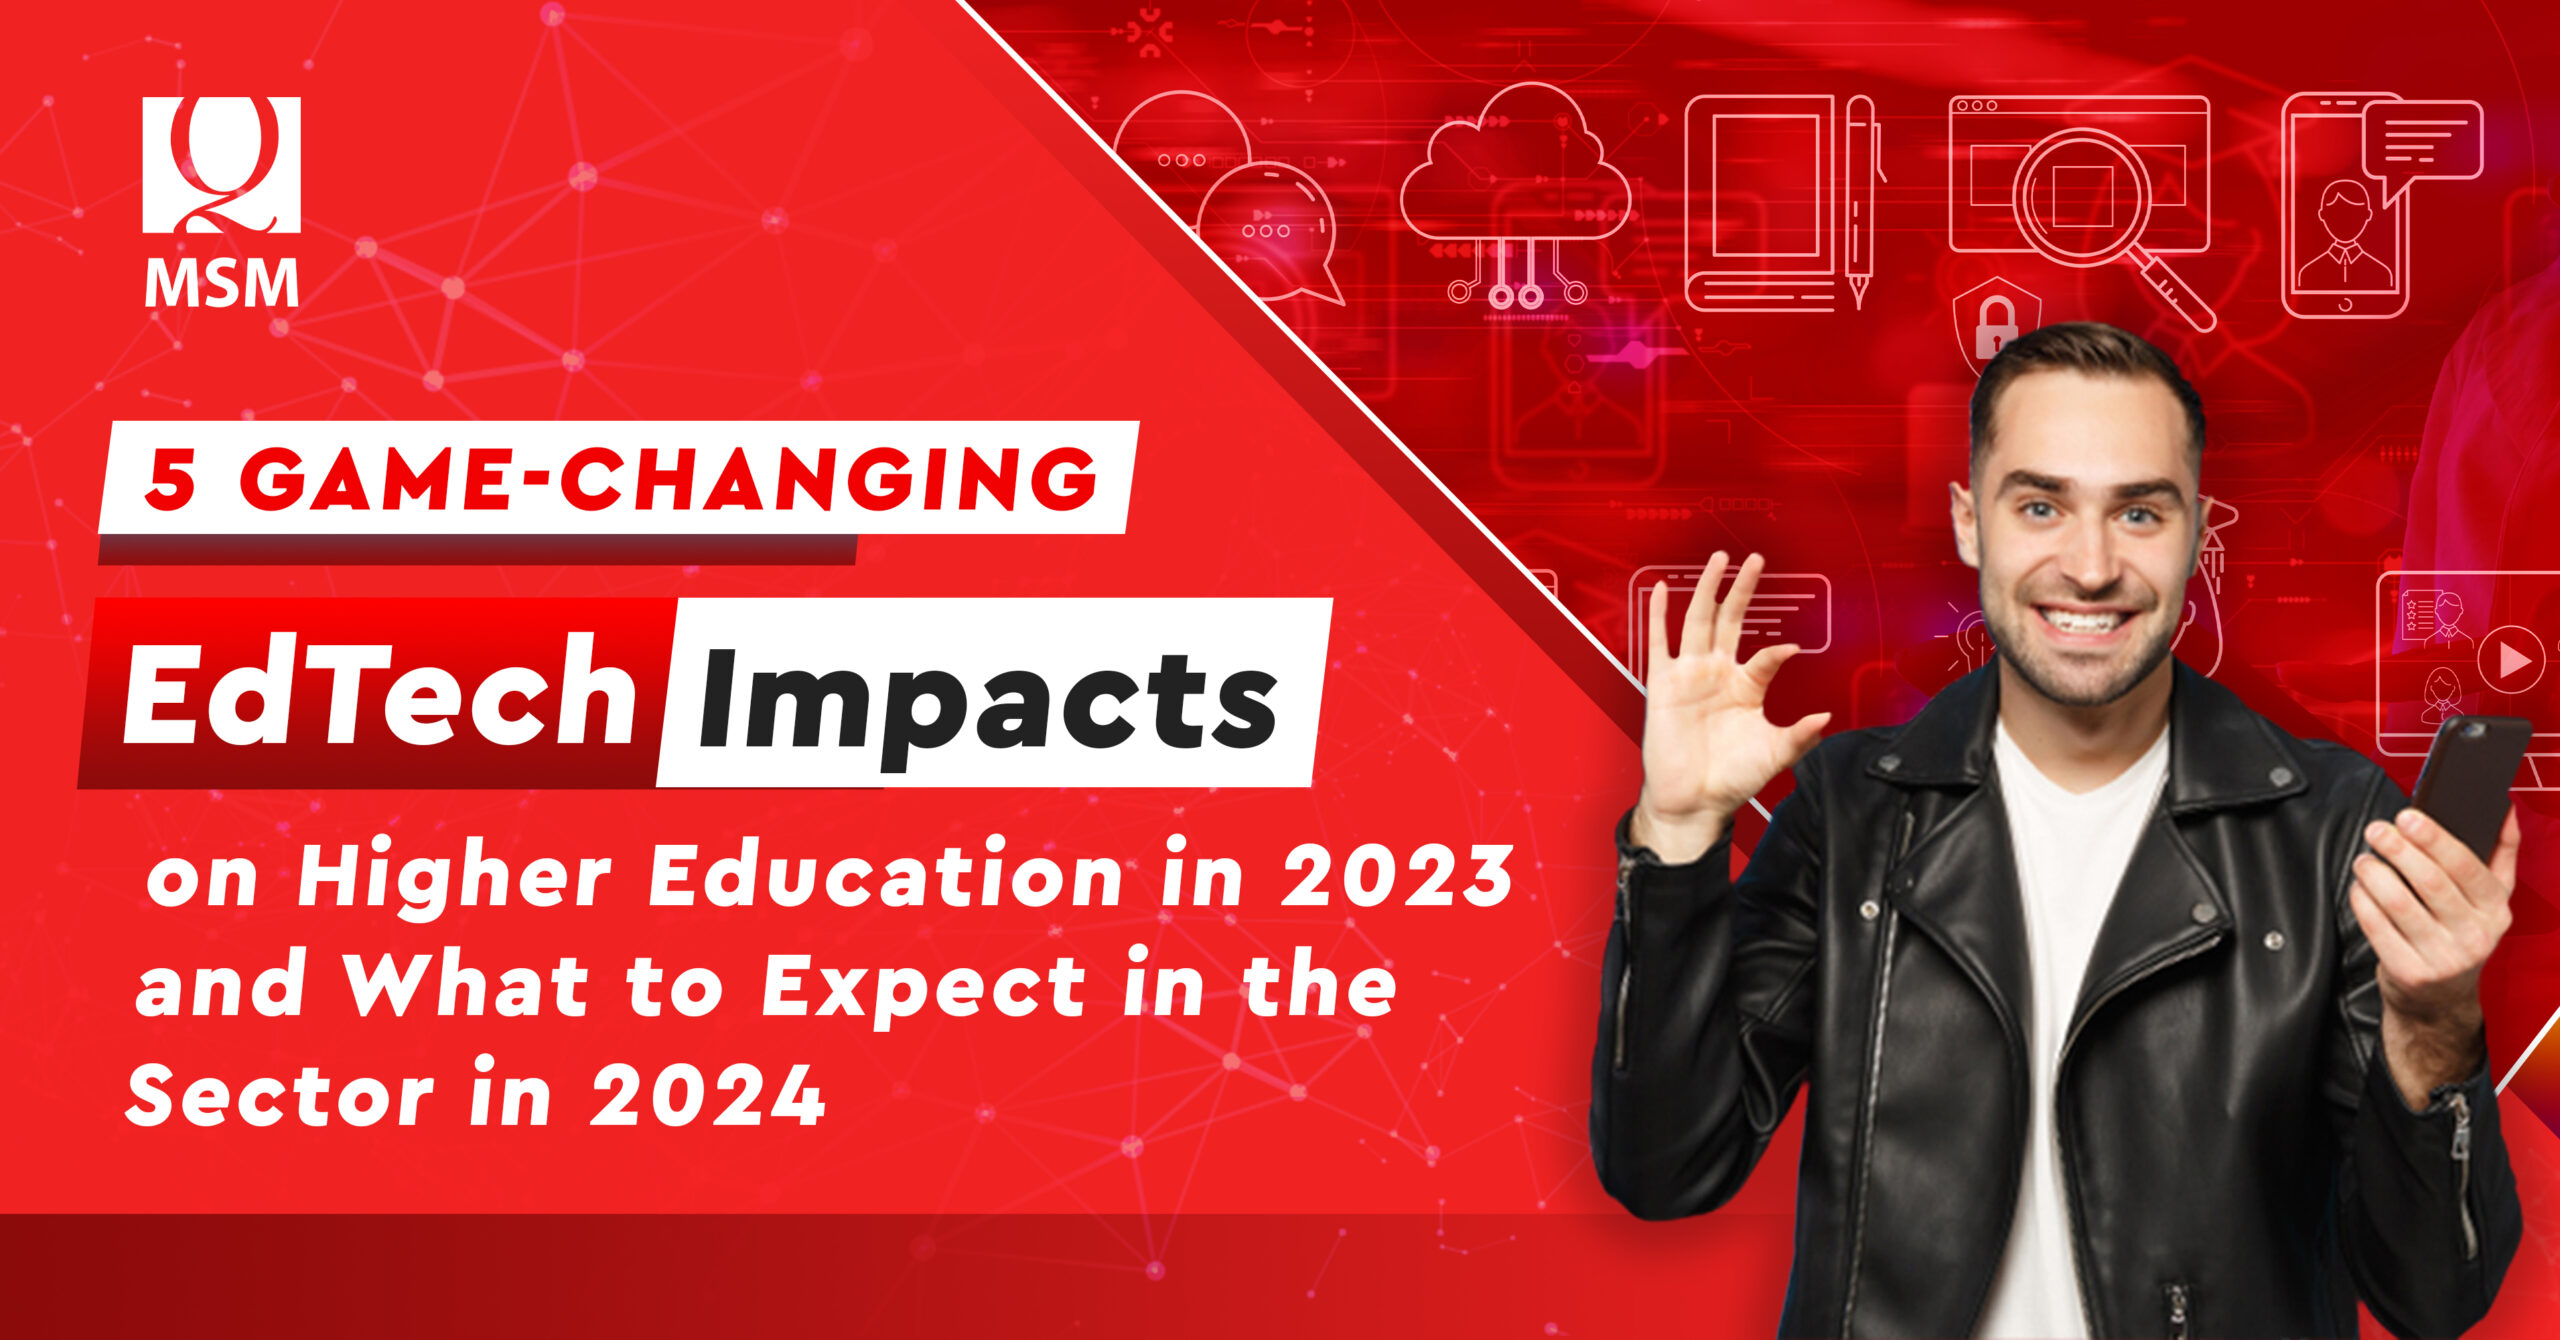 5 Game-Changing EdTech Impacts on Higher Education in 2023 and What to Expect in the Sector in 2024